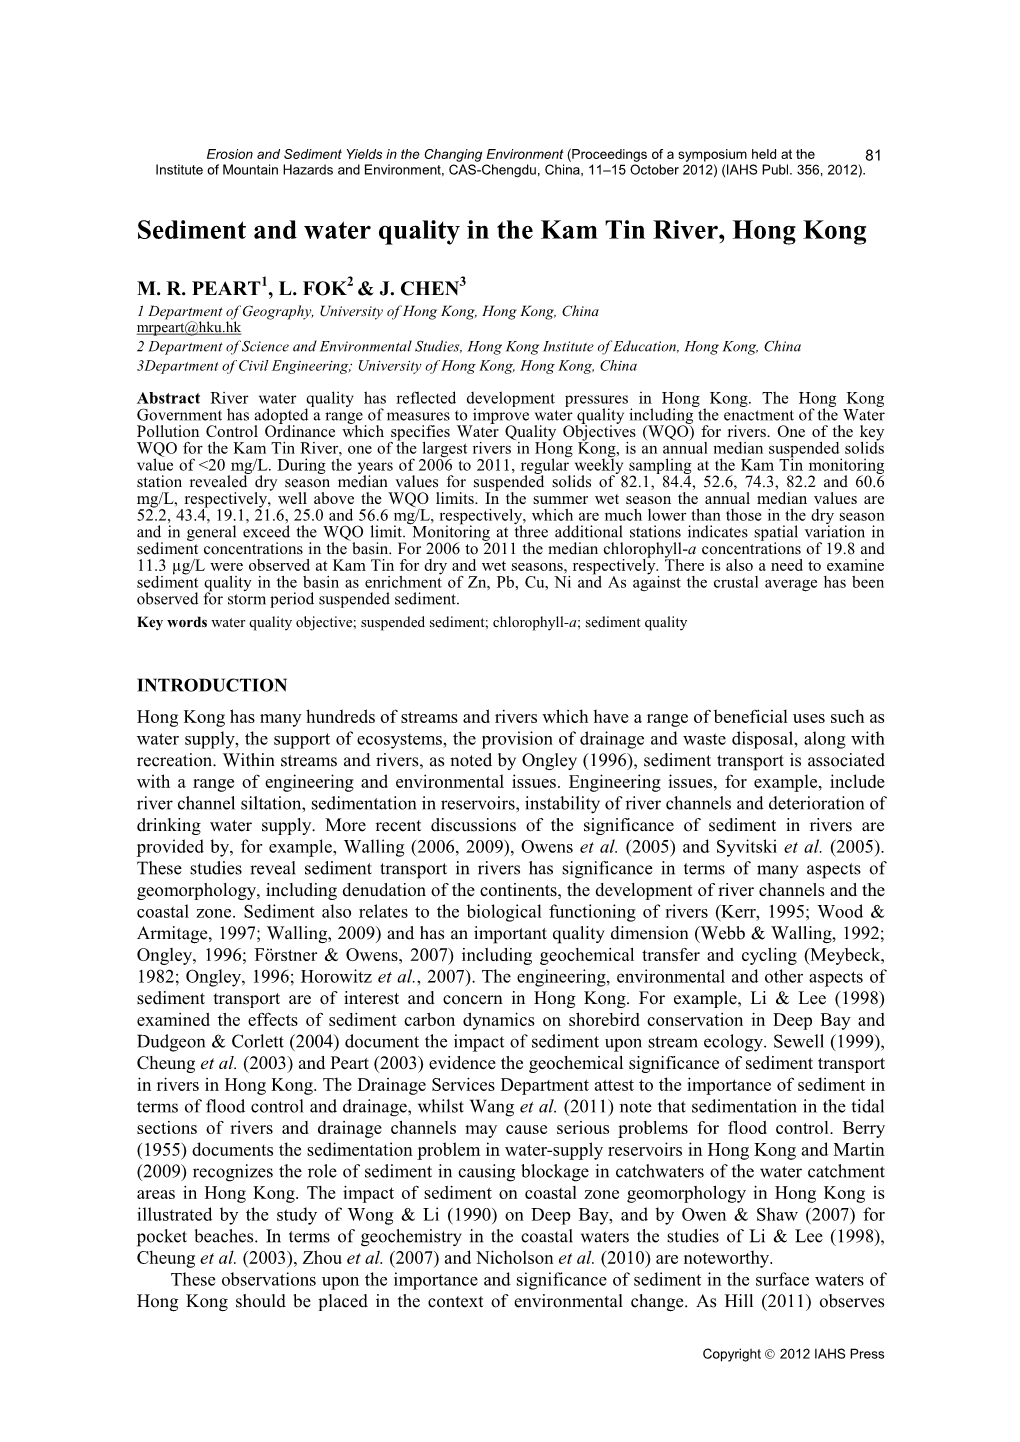 Sediment and Water Quality in the Kam Tin River, Hong Kong